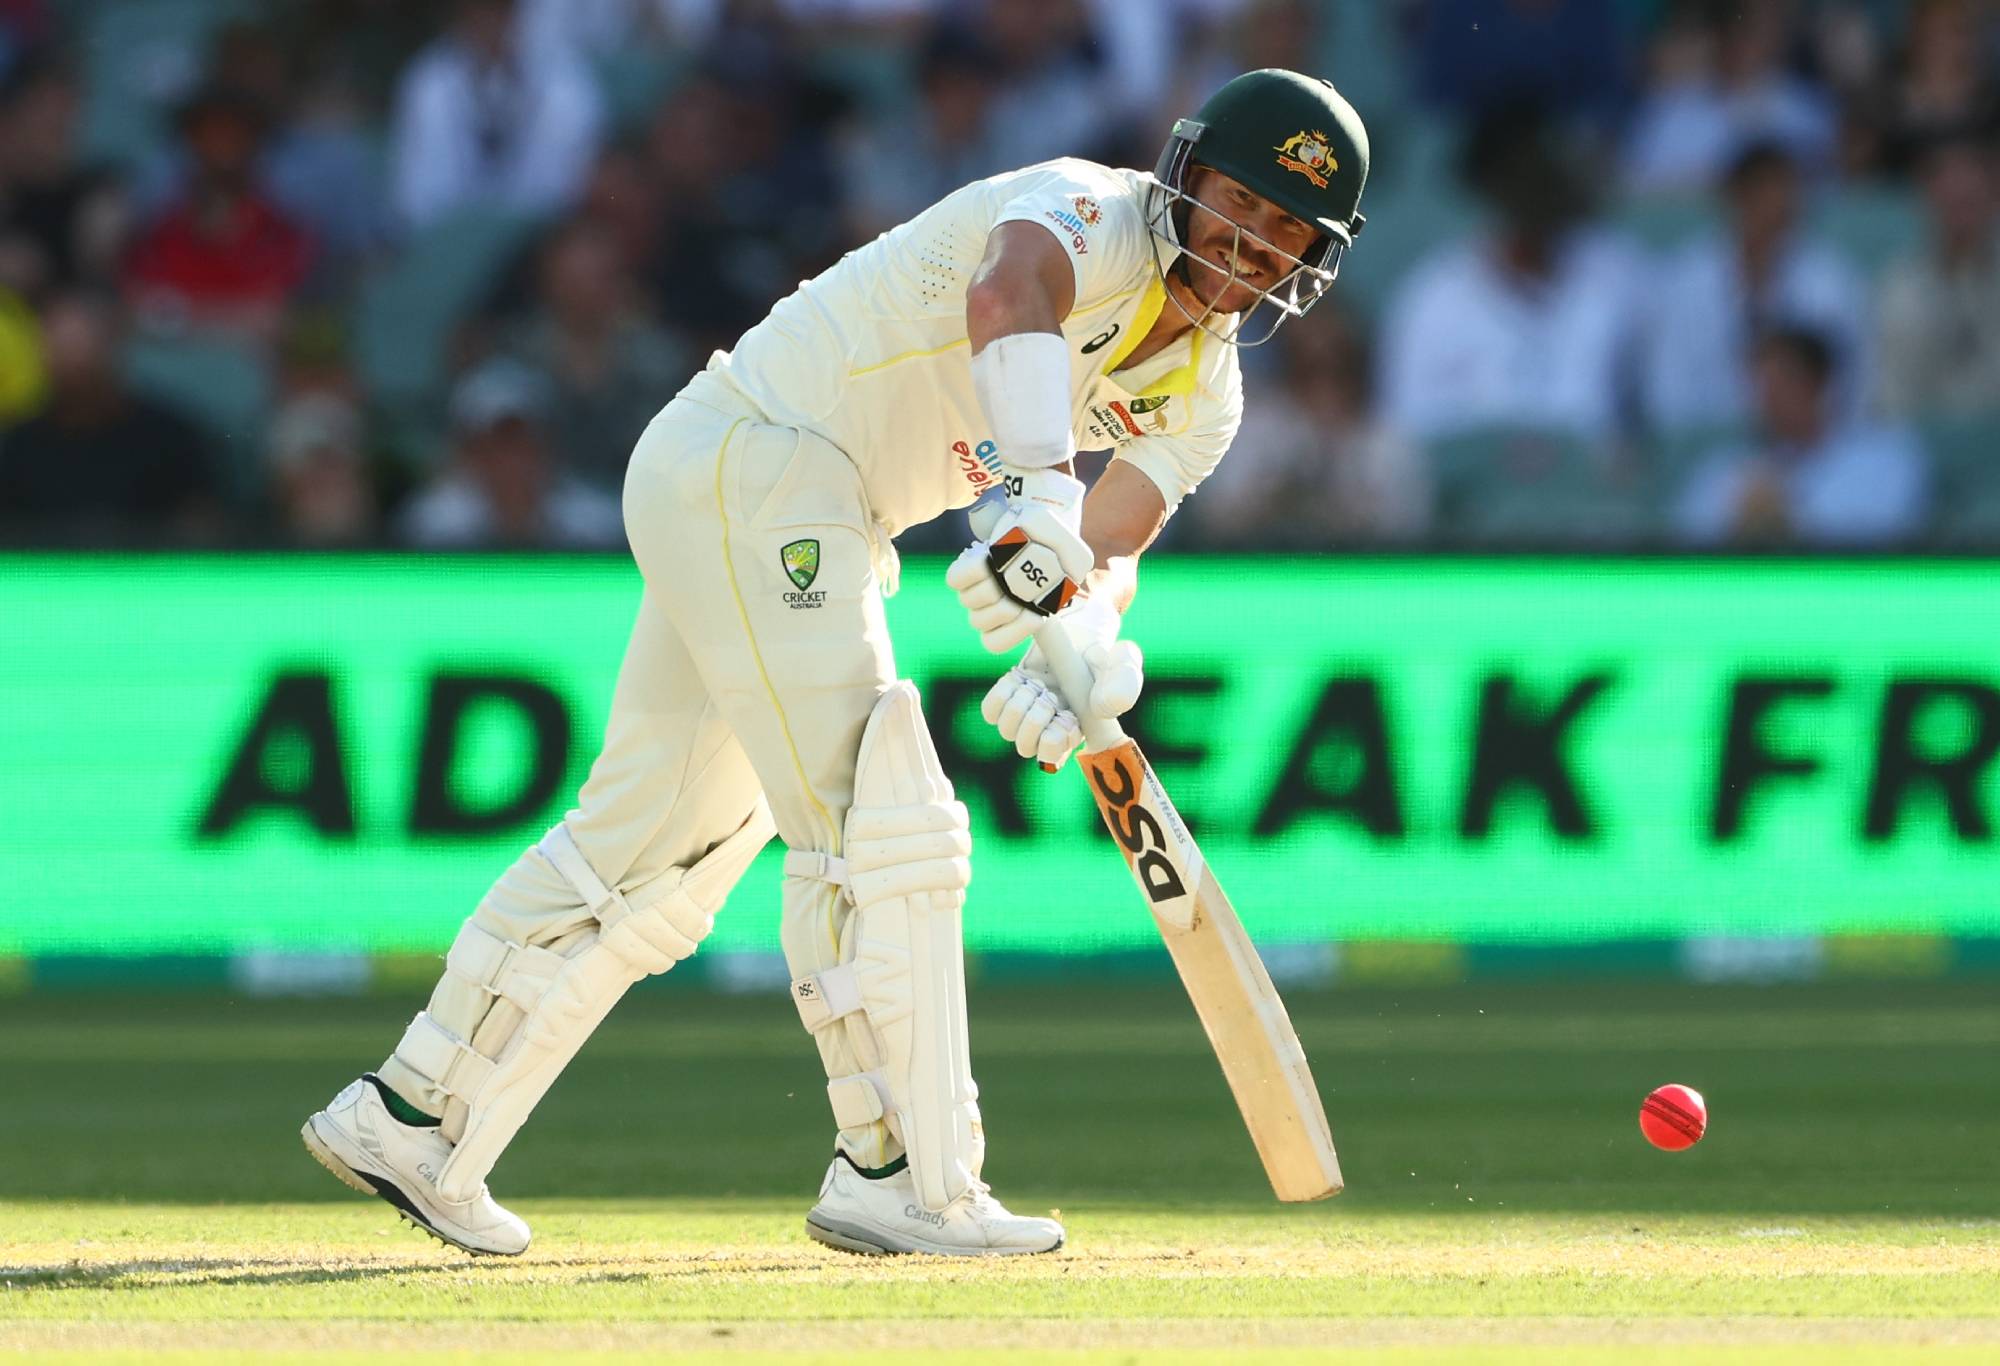 ADELAIDE, AUSTRALIA - DECEMBER 10: David Warner of Australia bats during day three of the Second Test Match in the series between Australia and the West Indies at Adelaide Oval on December 10, 2022 in Adelaide, Australia. (Photo by Chris Hyde/Getty Images)